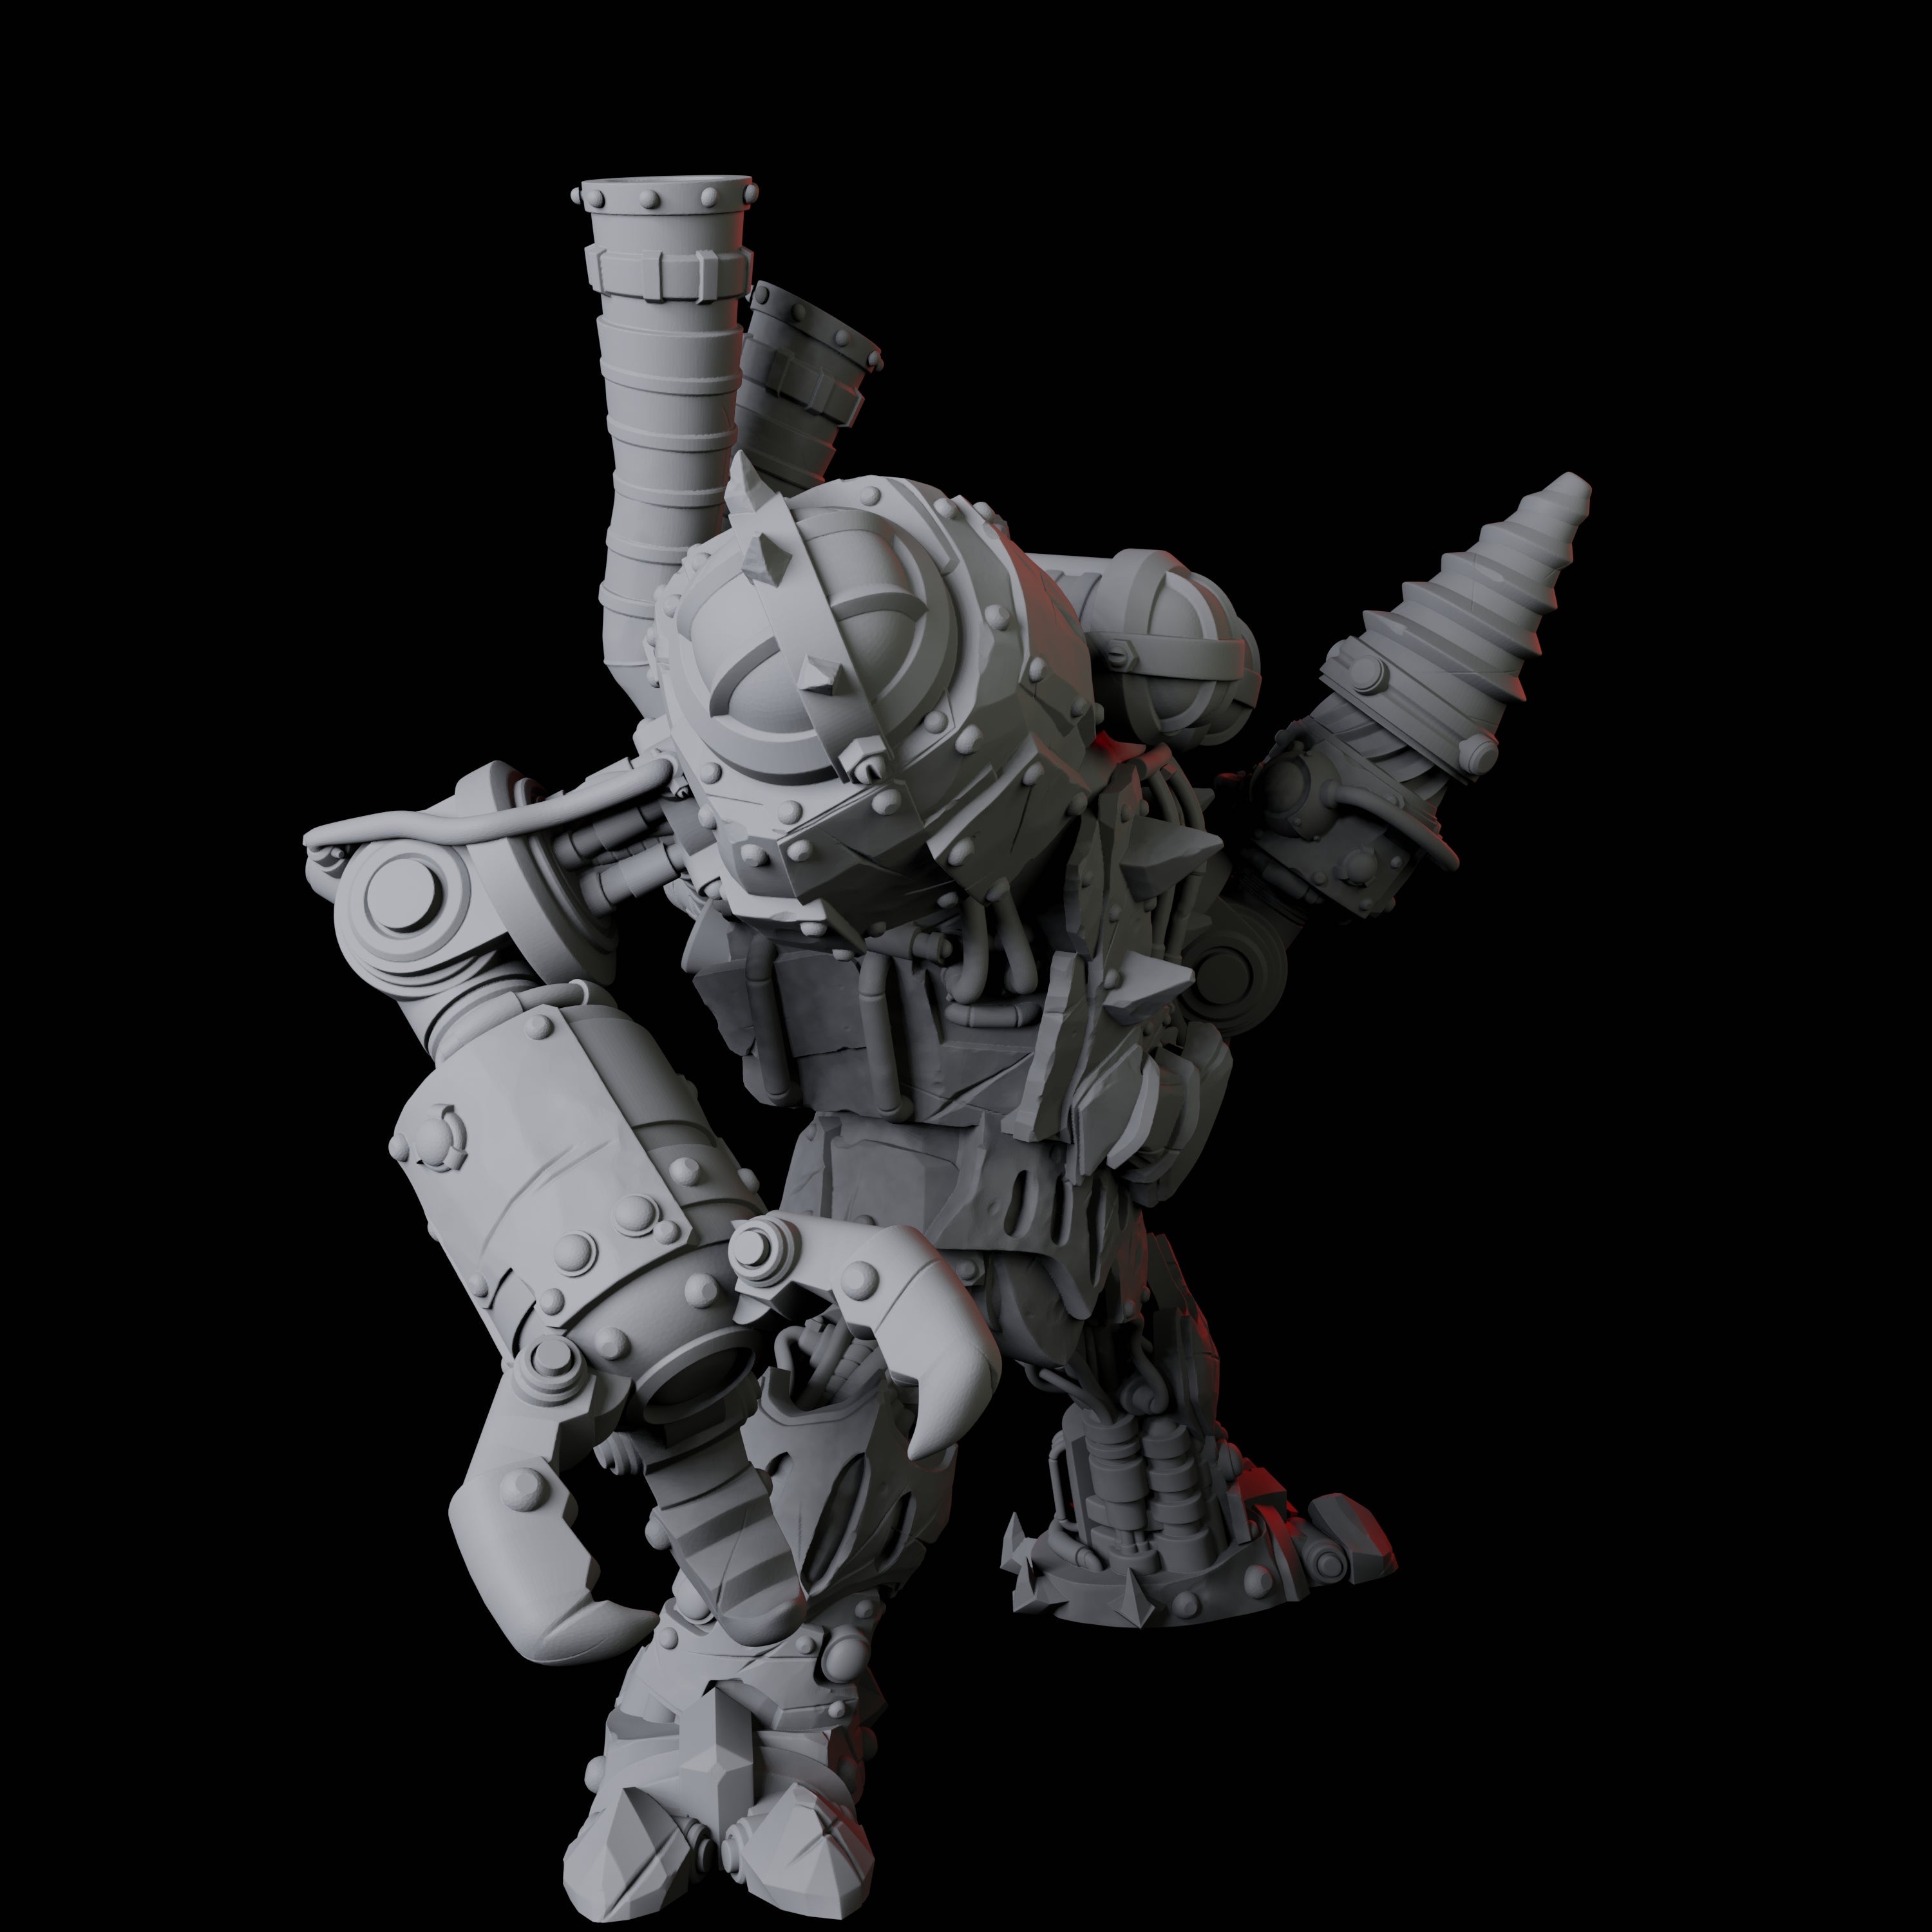 Gnome Mech Suit Miniature for Dungeons and Dragons